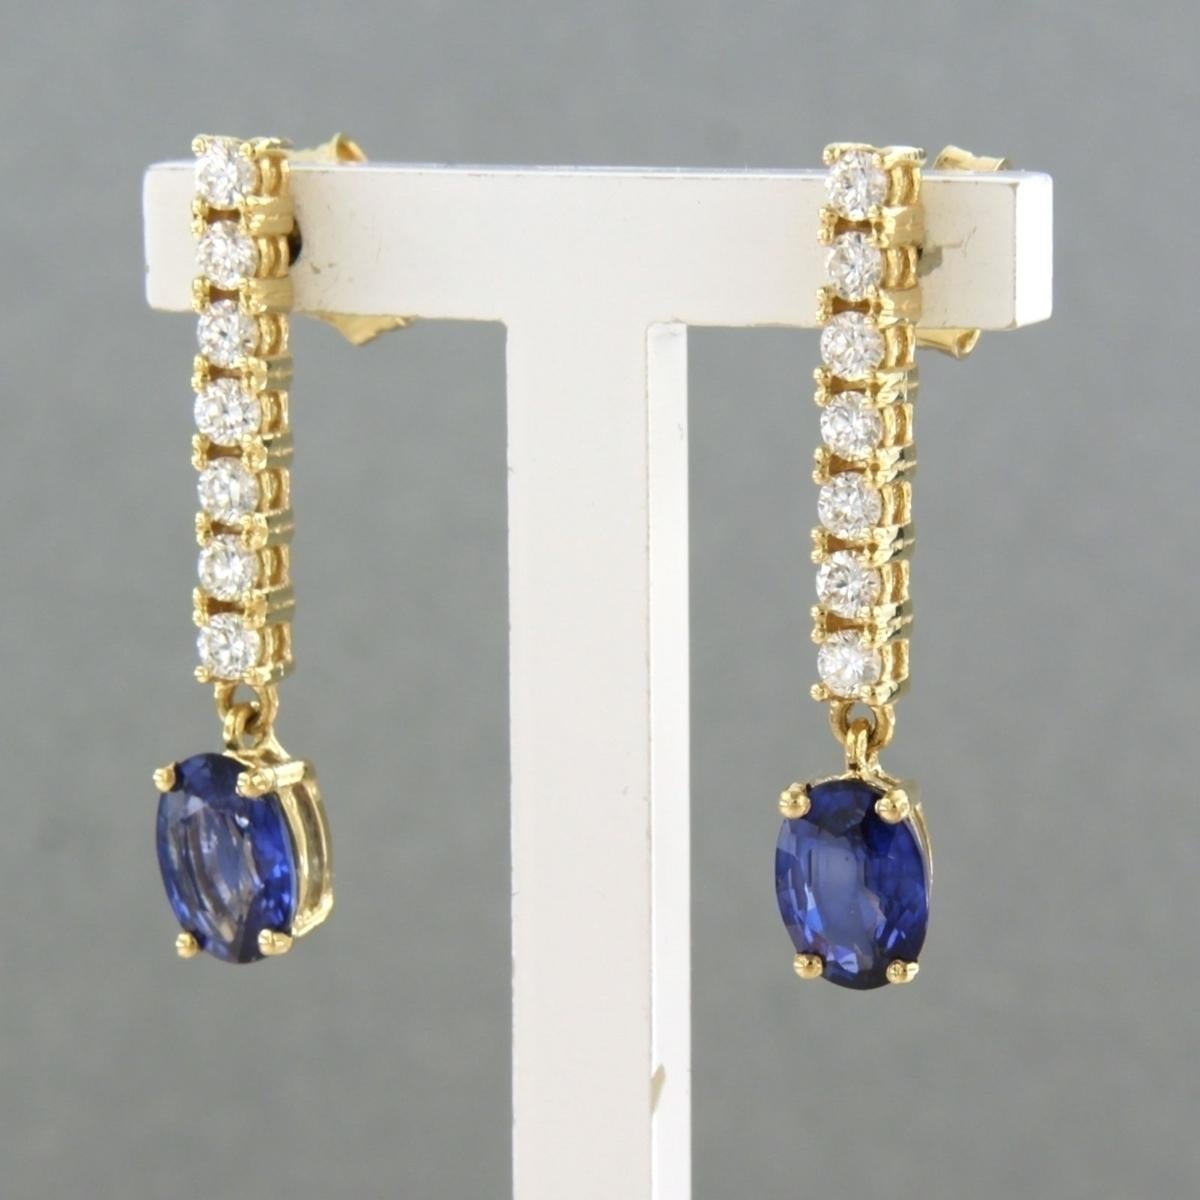 18k yellow gold earrings set with sapphire up to. 1.70ct and brilliant cut diamond up to. 0.60ct - F/G - VS/SI

detailed description:

The earrings are 2.8 cm high and 5.2 mm wide

weight: 3.5 grams

occupied with :

- 2 x 7.0 mm x 5.0 mm oval facet